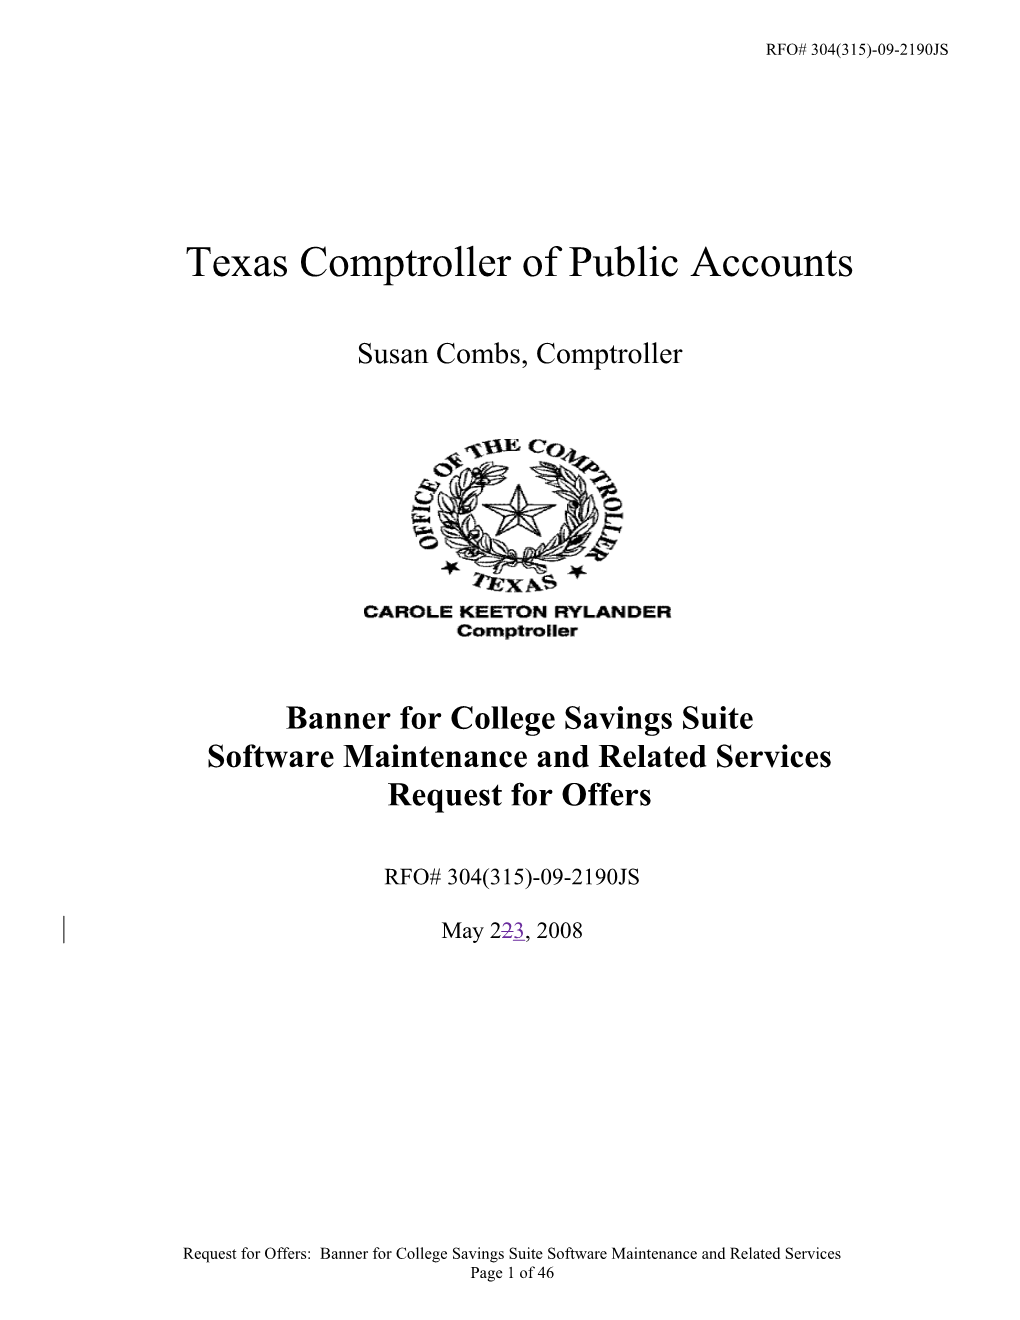 Texas State Comptroller of Public Accounts